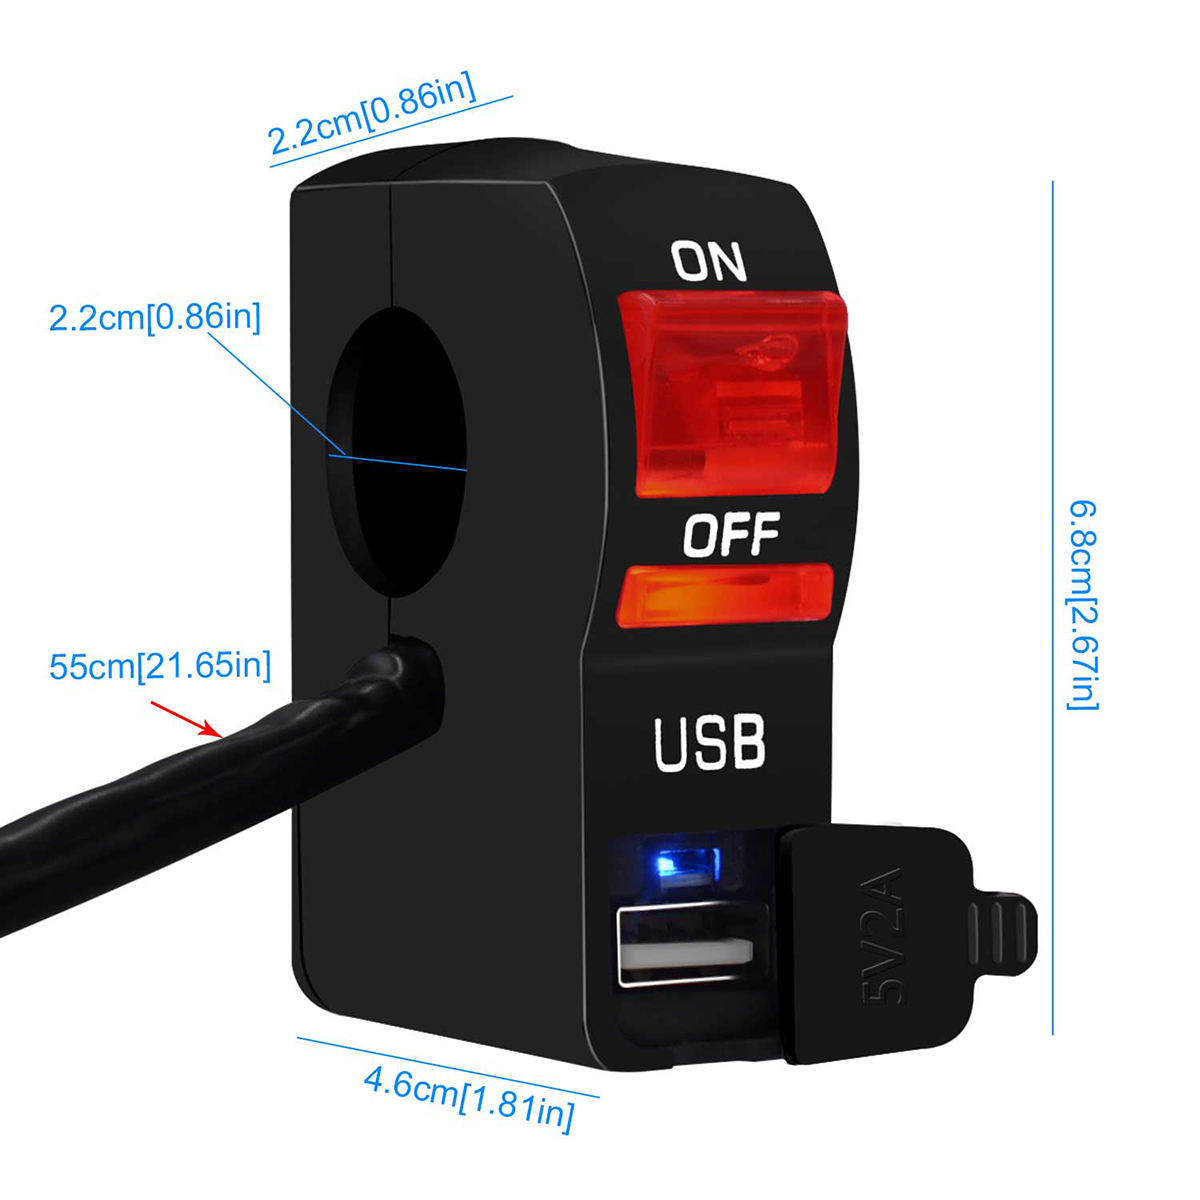 Universal Motorcycle Headlight ON/OFF Switch 5V 2A Fast Charge USB Adapter Charger With Blue LED Indicator Light